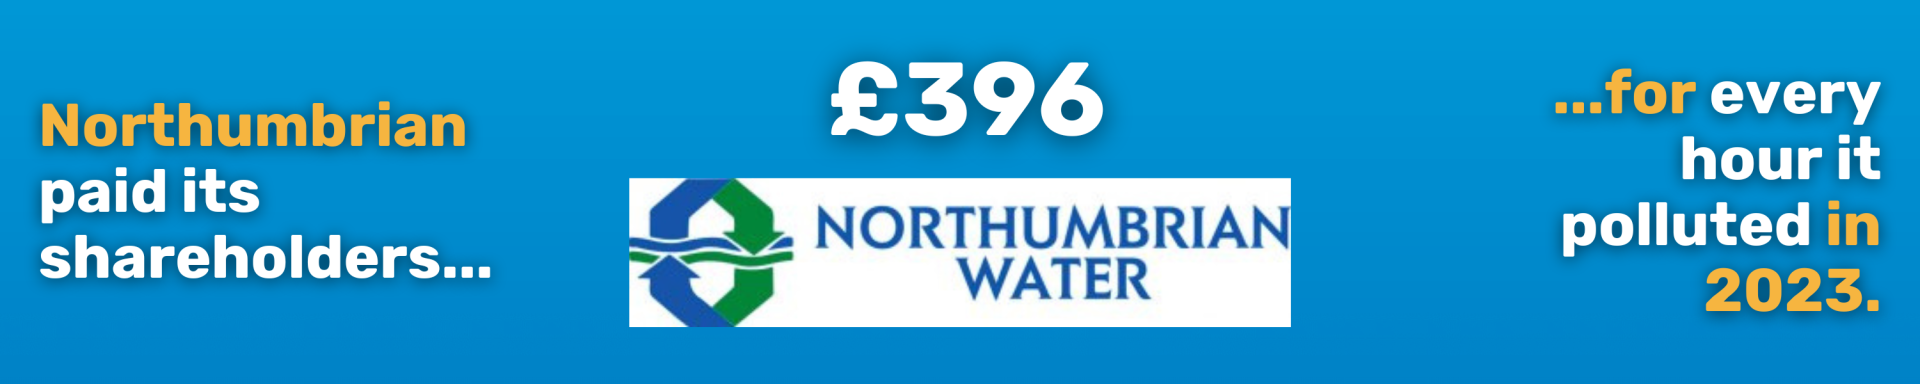 Text reads: "Northumbrian Water paid its shareholders £396 for every hour it polluted in 2023."